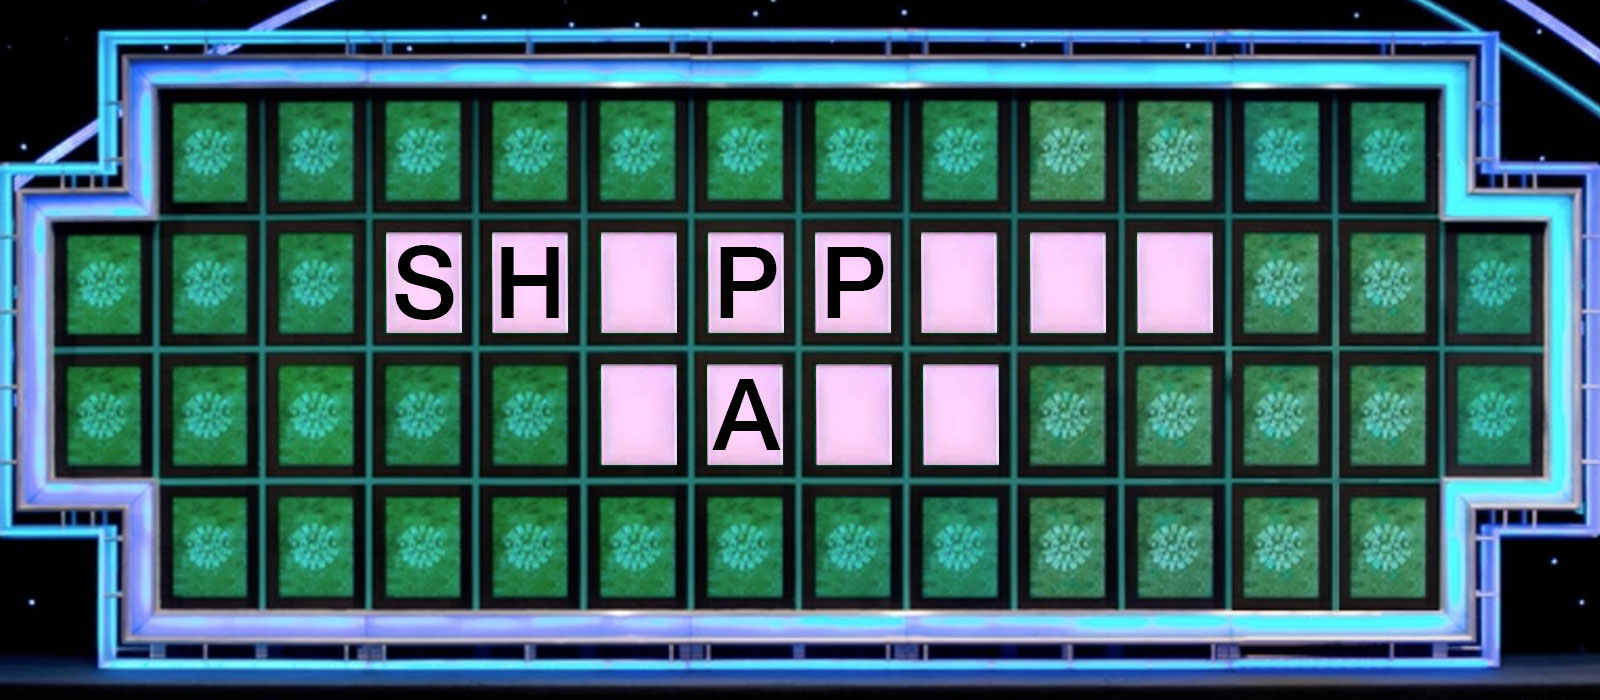 wheel of fortune things 3 words rock solid